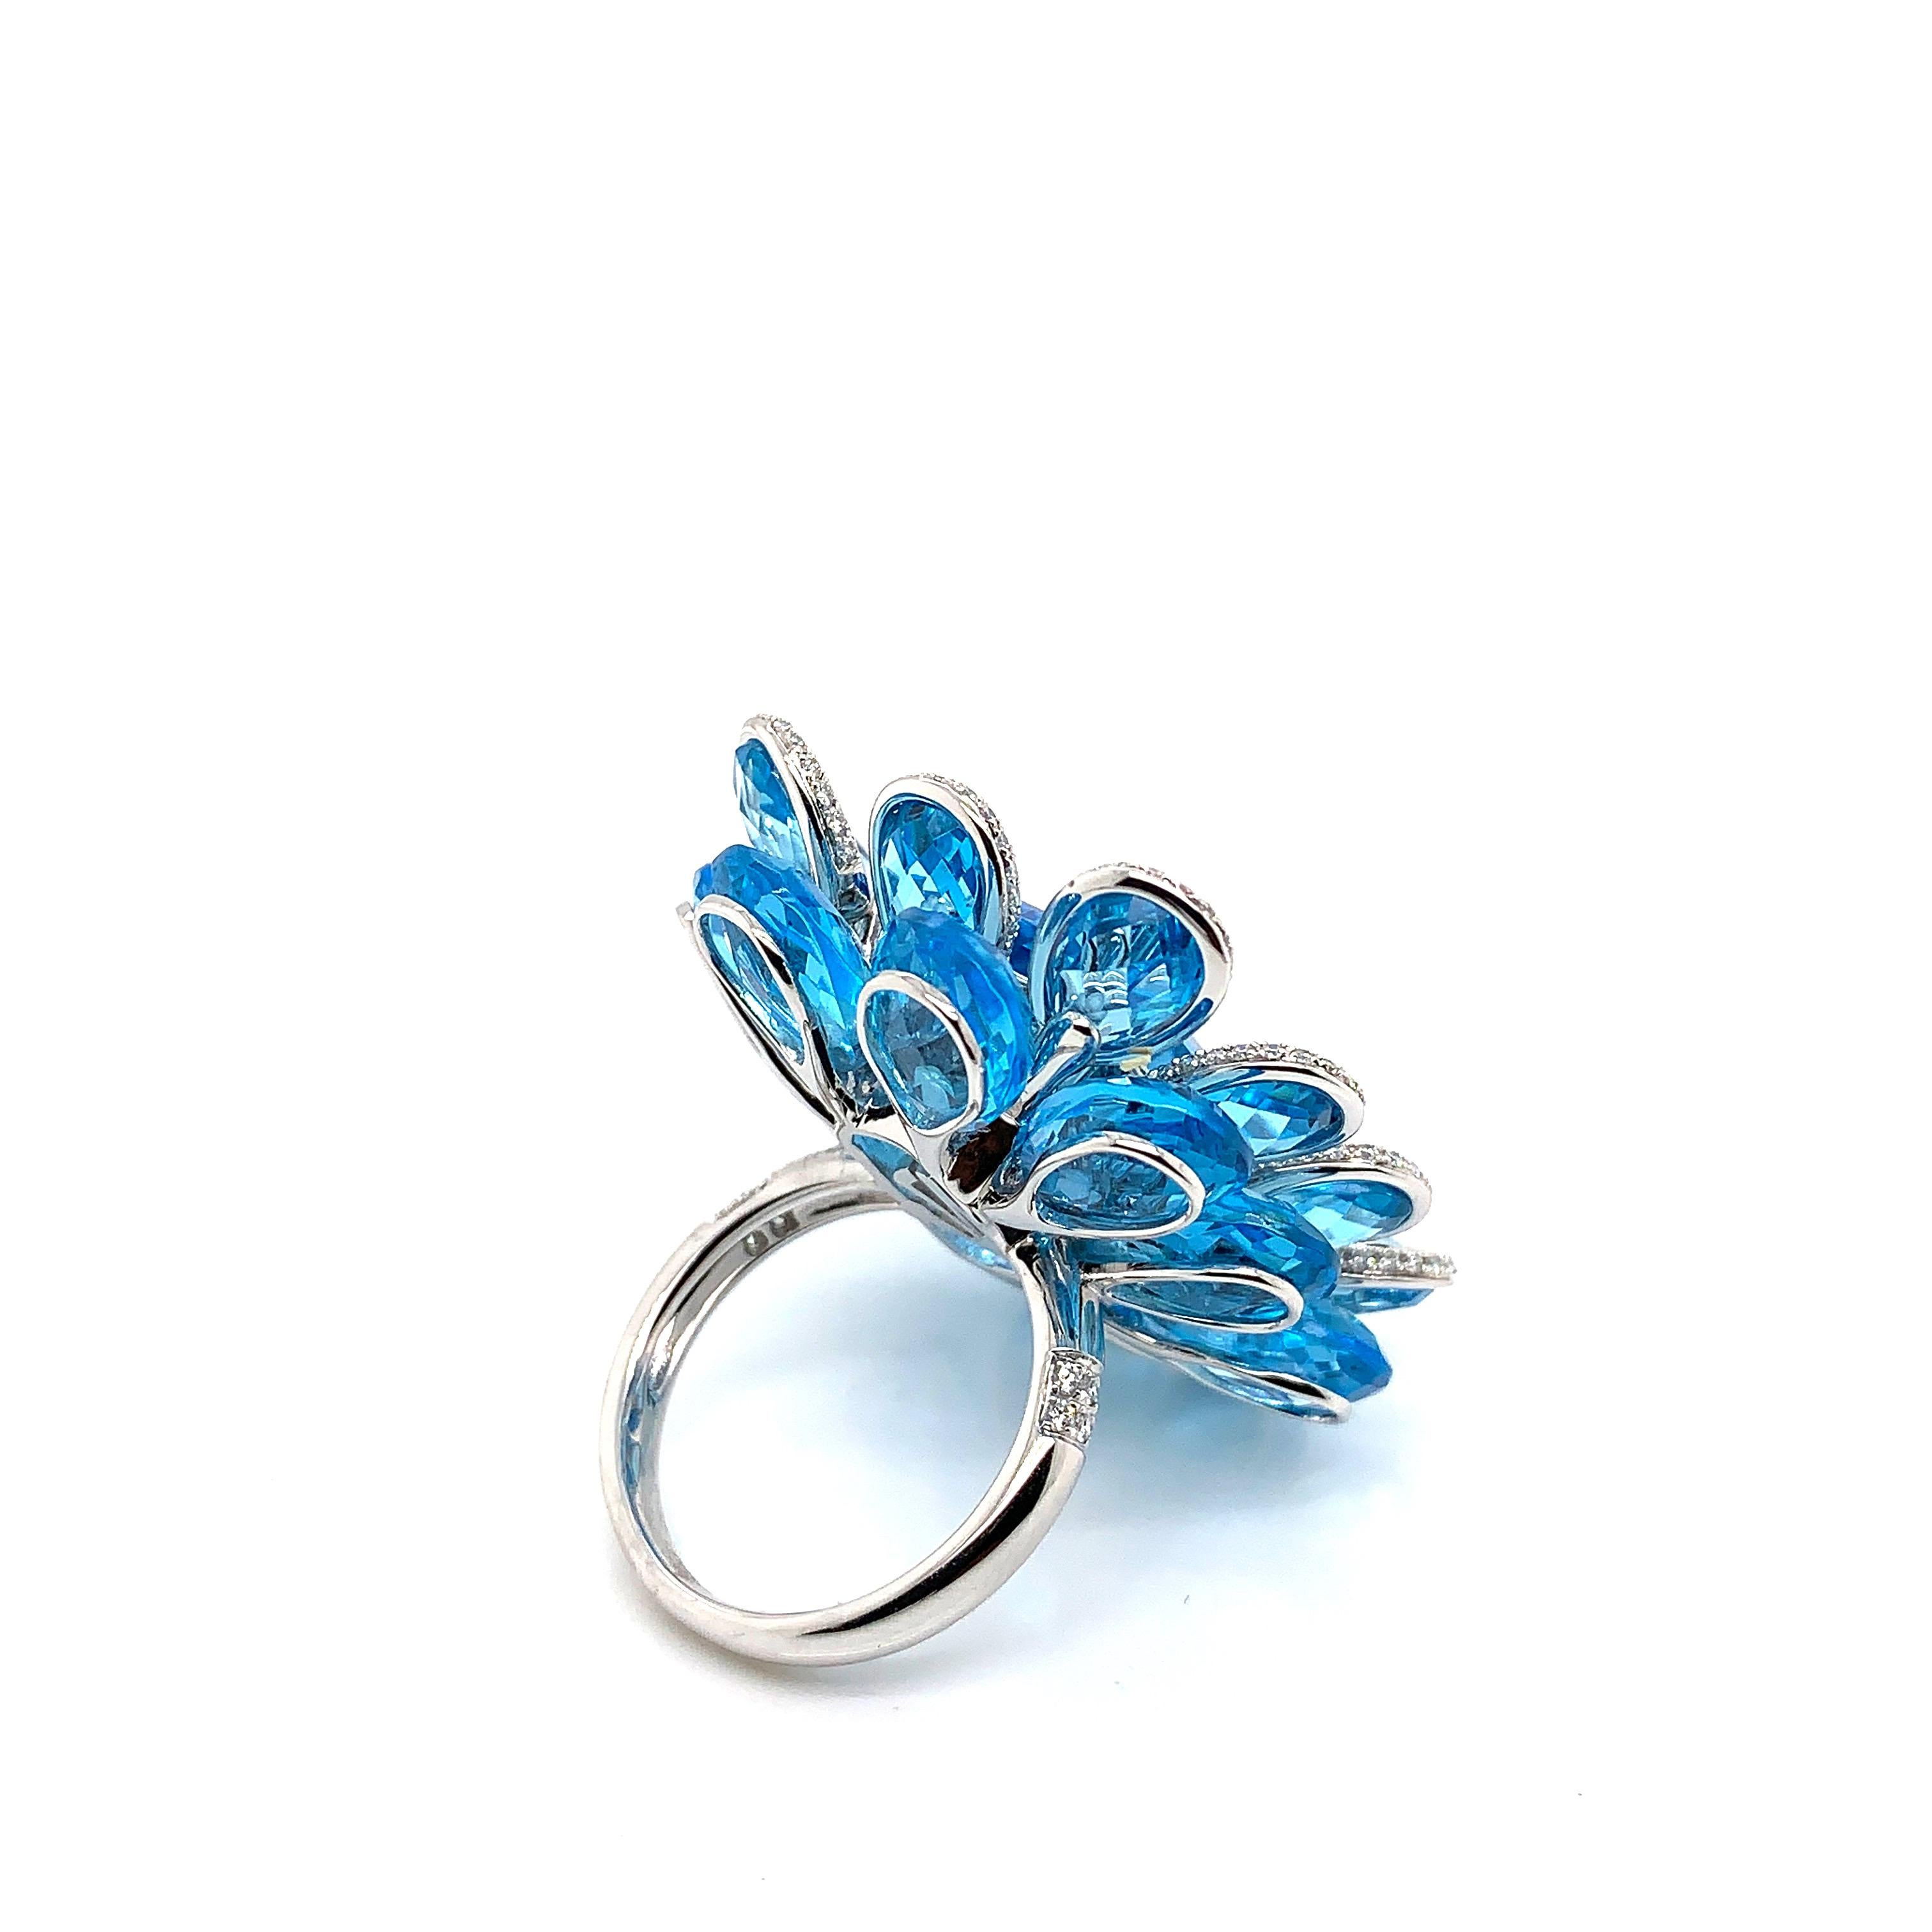 21.5 Carat Blue Topaz and Diamond Floral Ring in 18 Karat White Gold For Sale 2